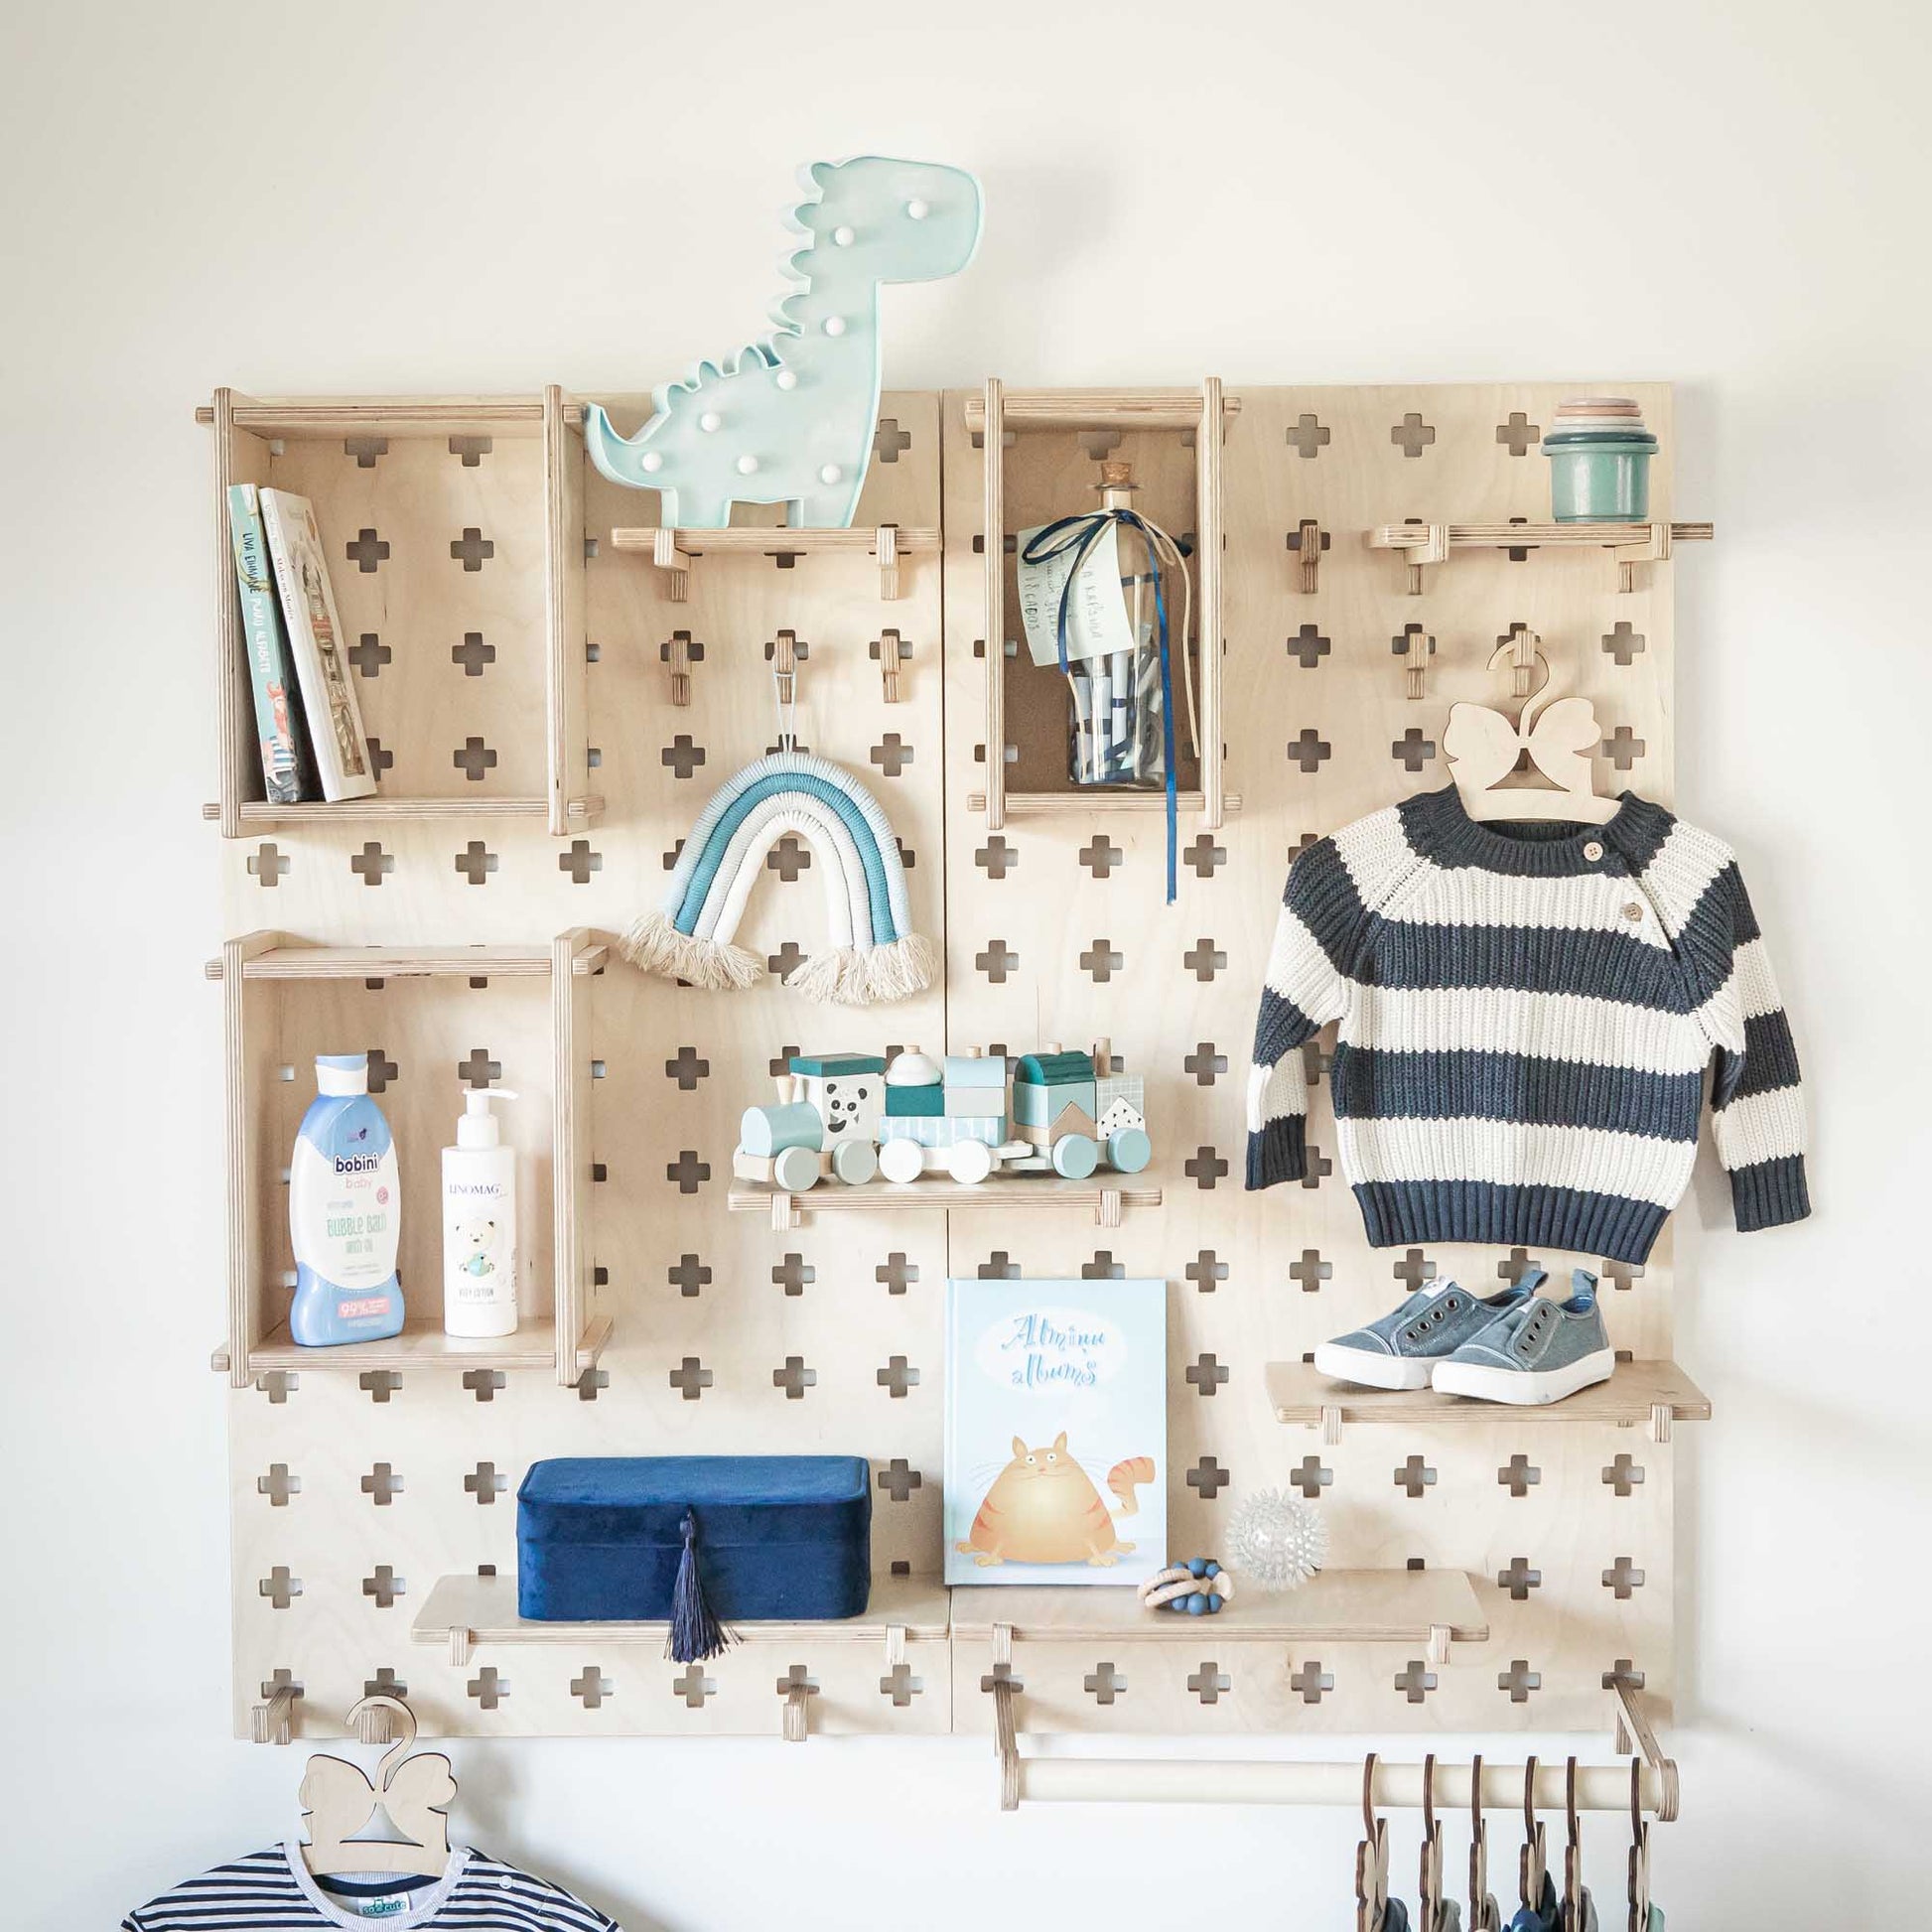 A boy's room with open storage shelves and a Sweet HOME from wood Large Pegboard Shelf with Clothes Hanger.